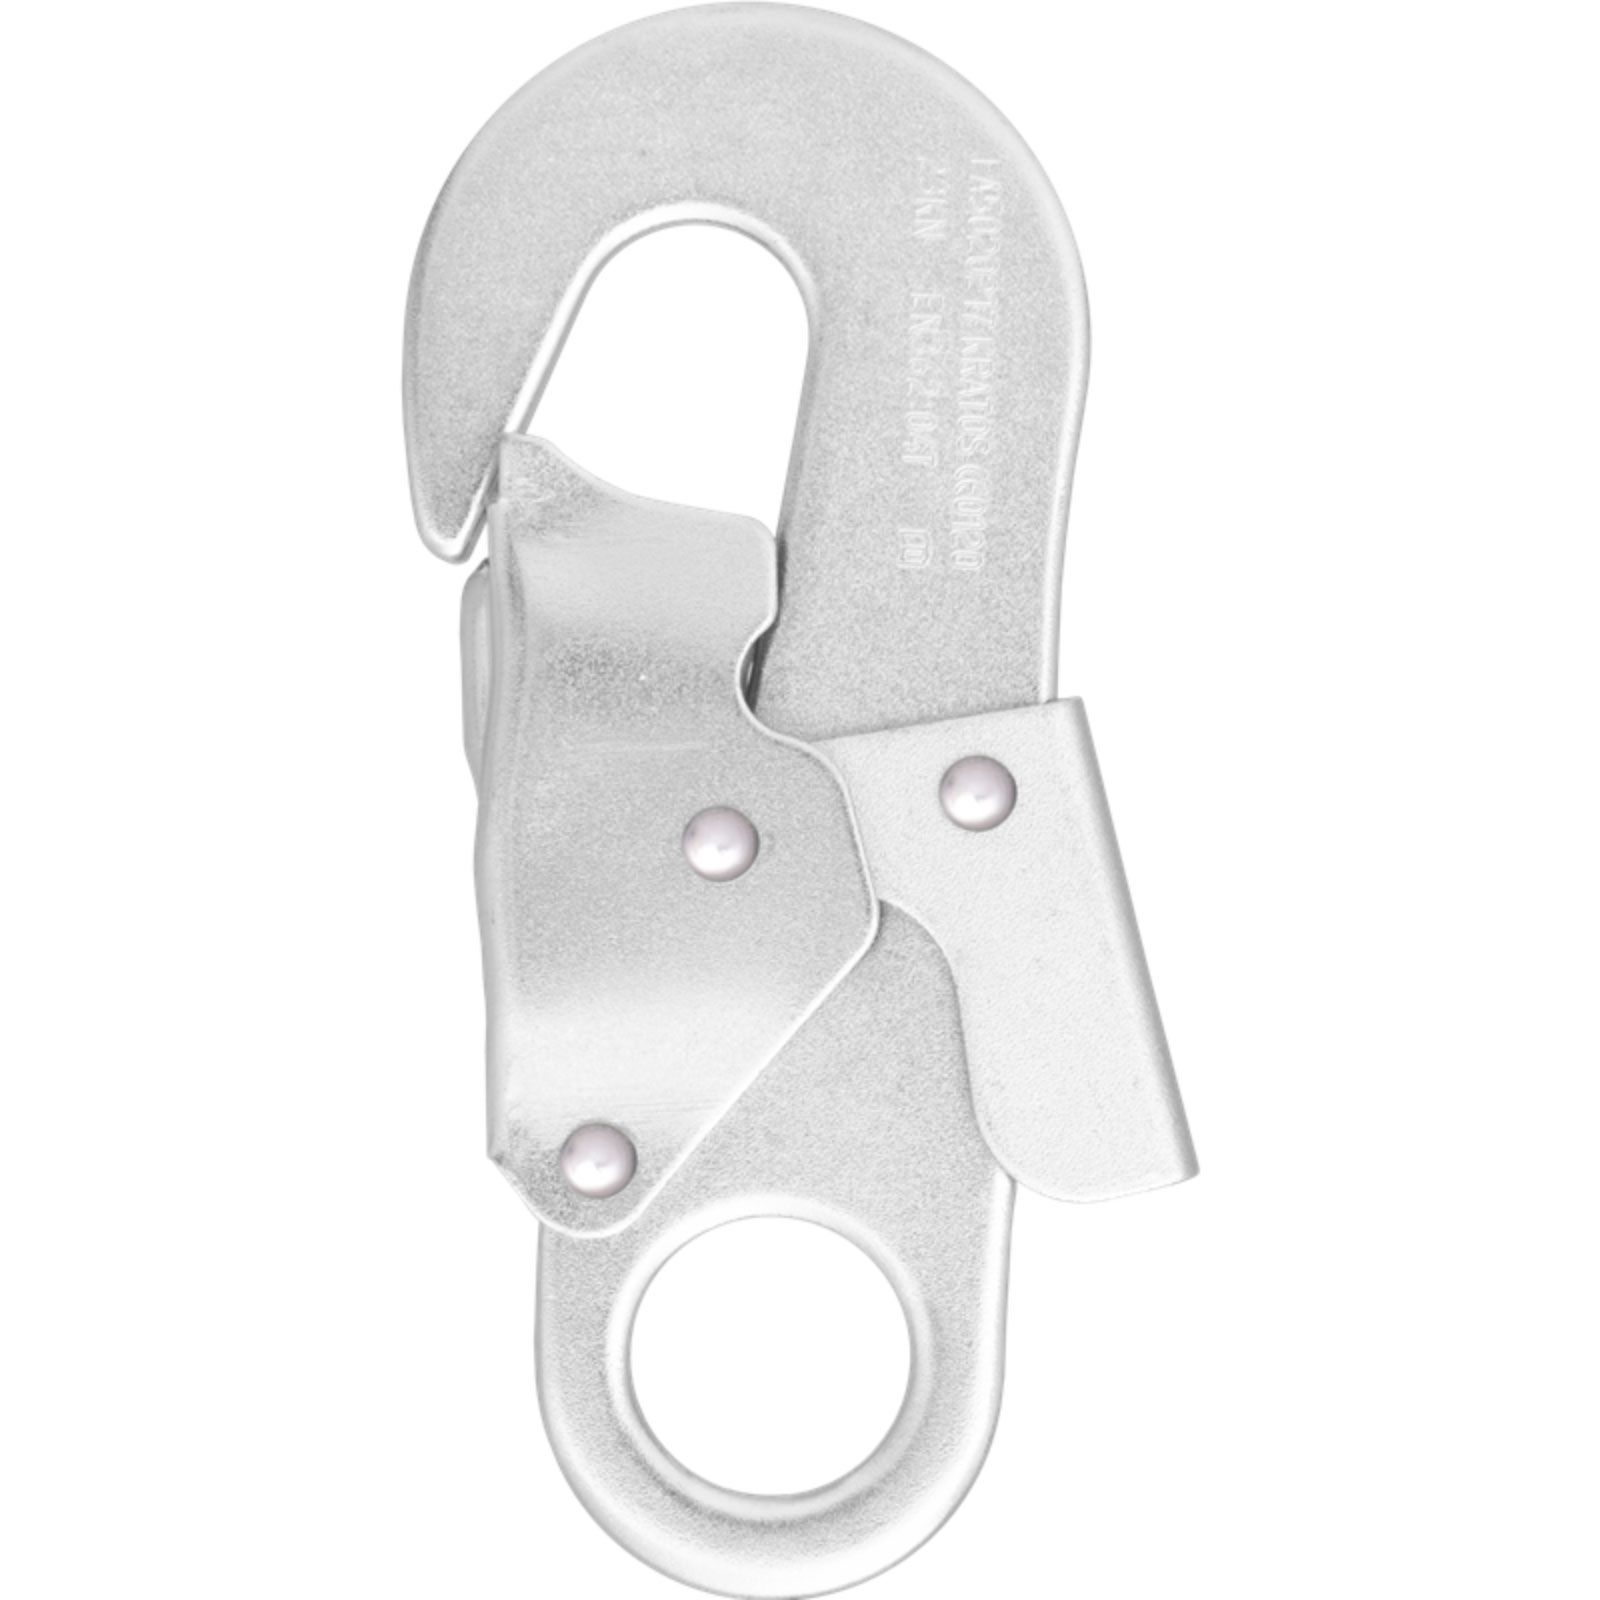 Kratos FA 50 202 17 Steel Snap Hook Only £10.98 excl vat From Safety ...